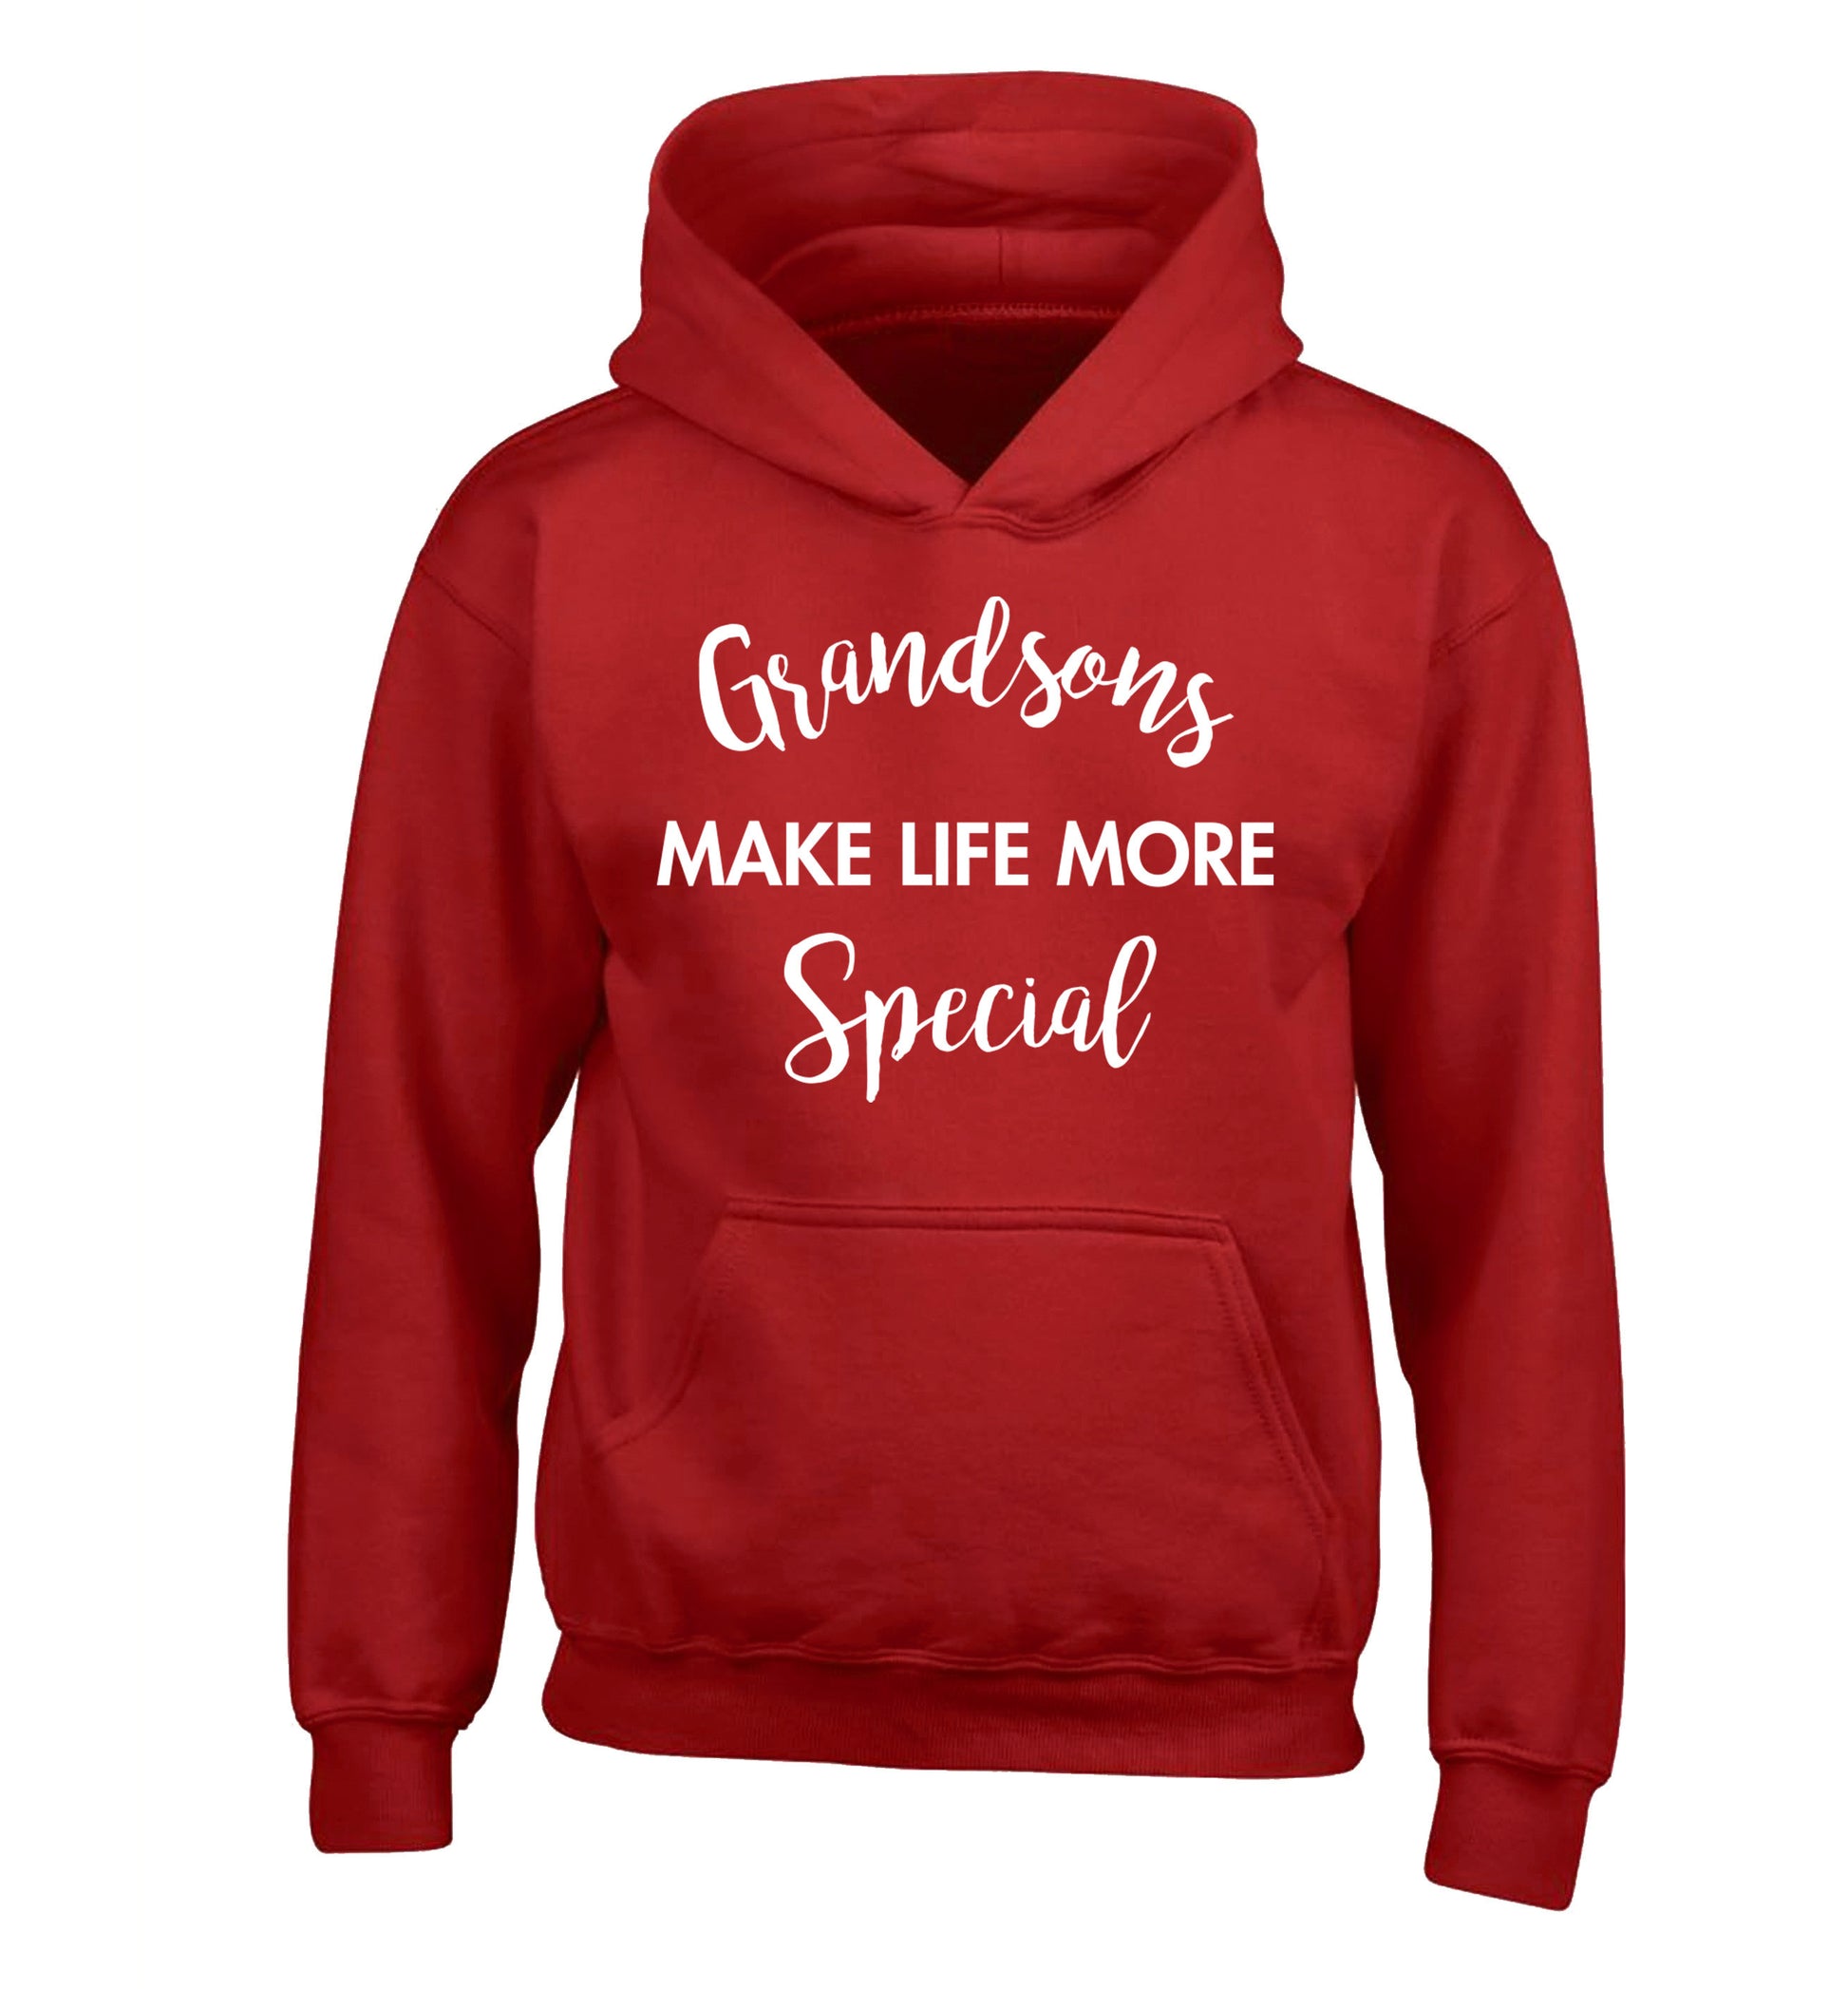 Grandsons make life more special children's red hoodie 12-14 Years